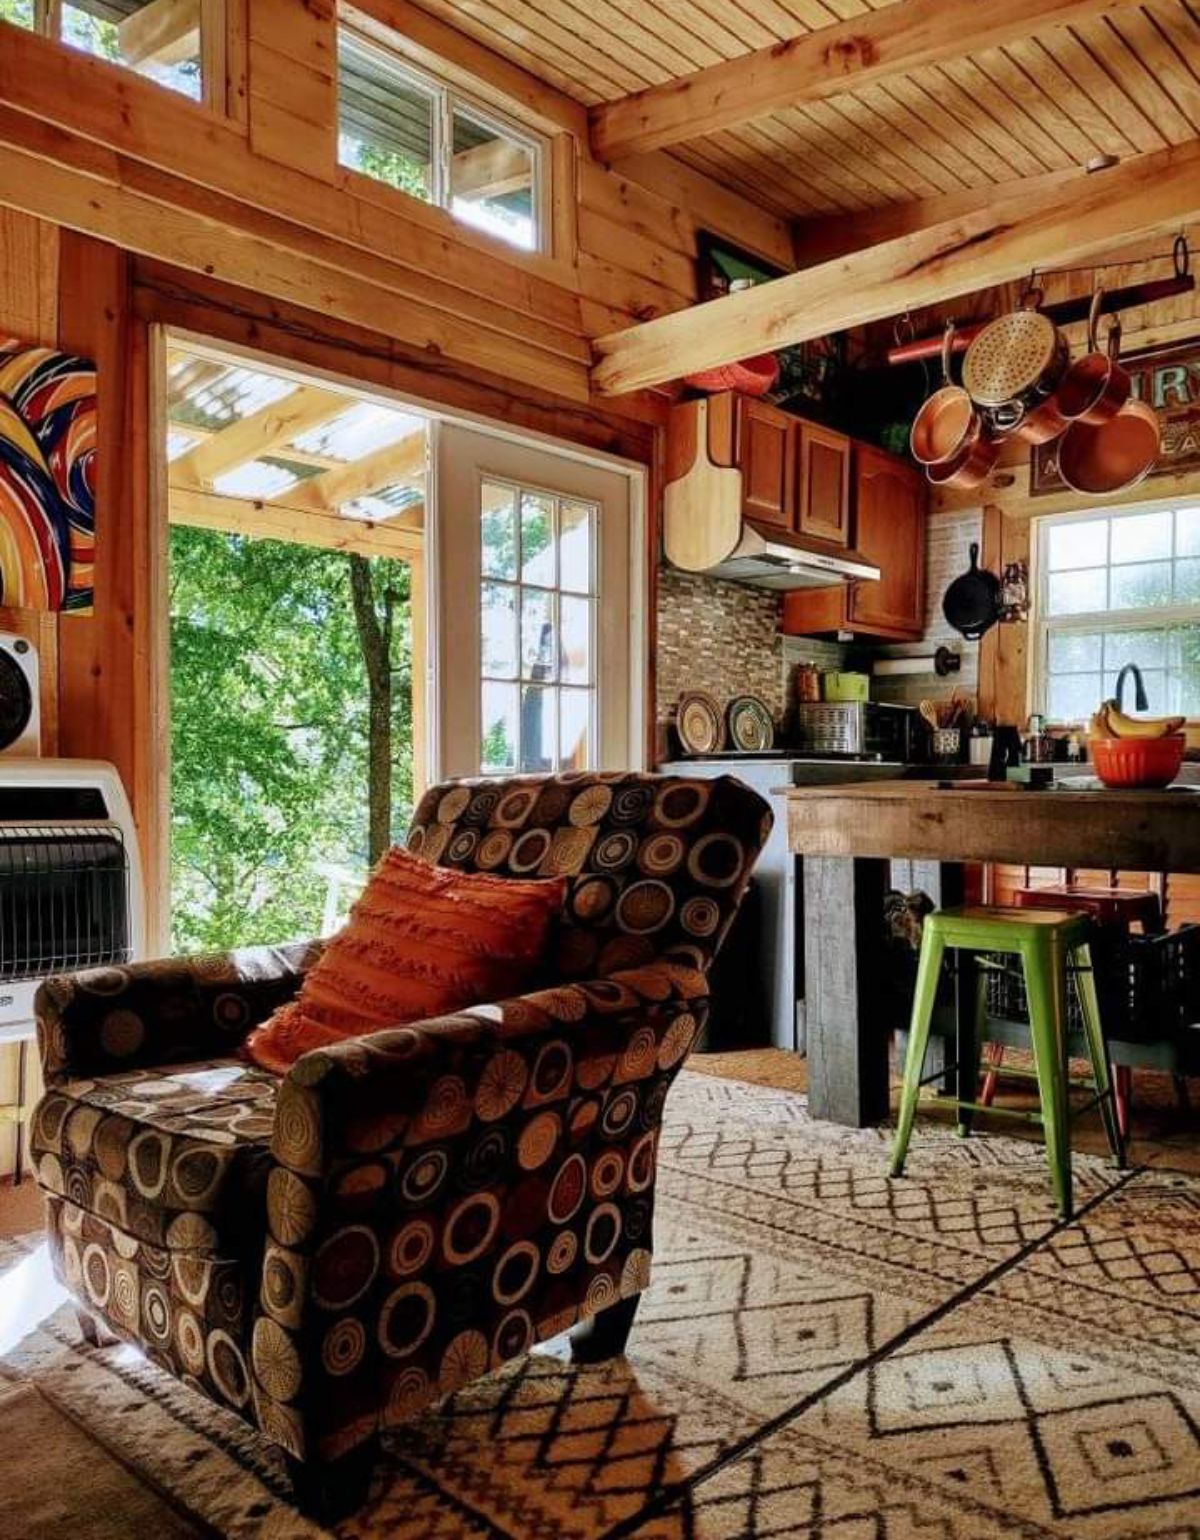 Ray’s Cabin Off-the-Grid Tiny House indoor cosy area.